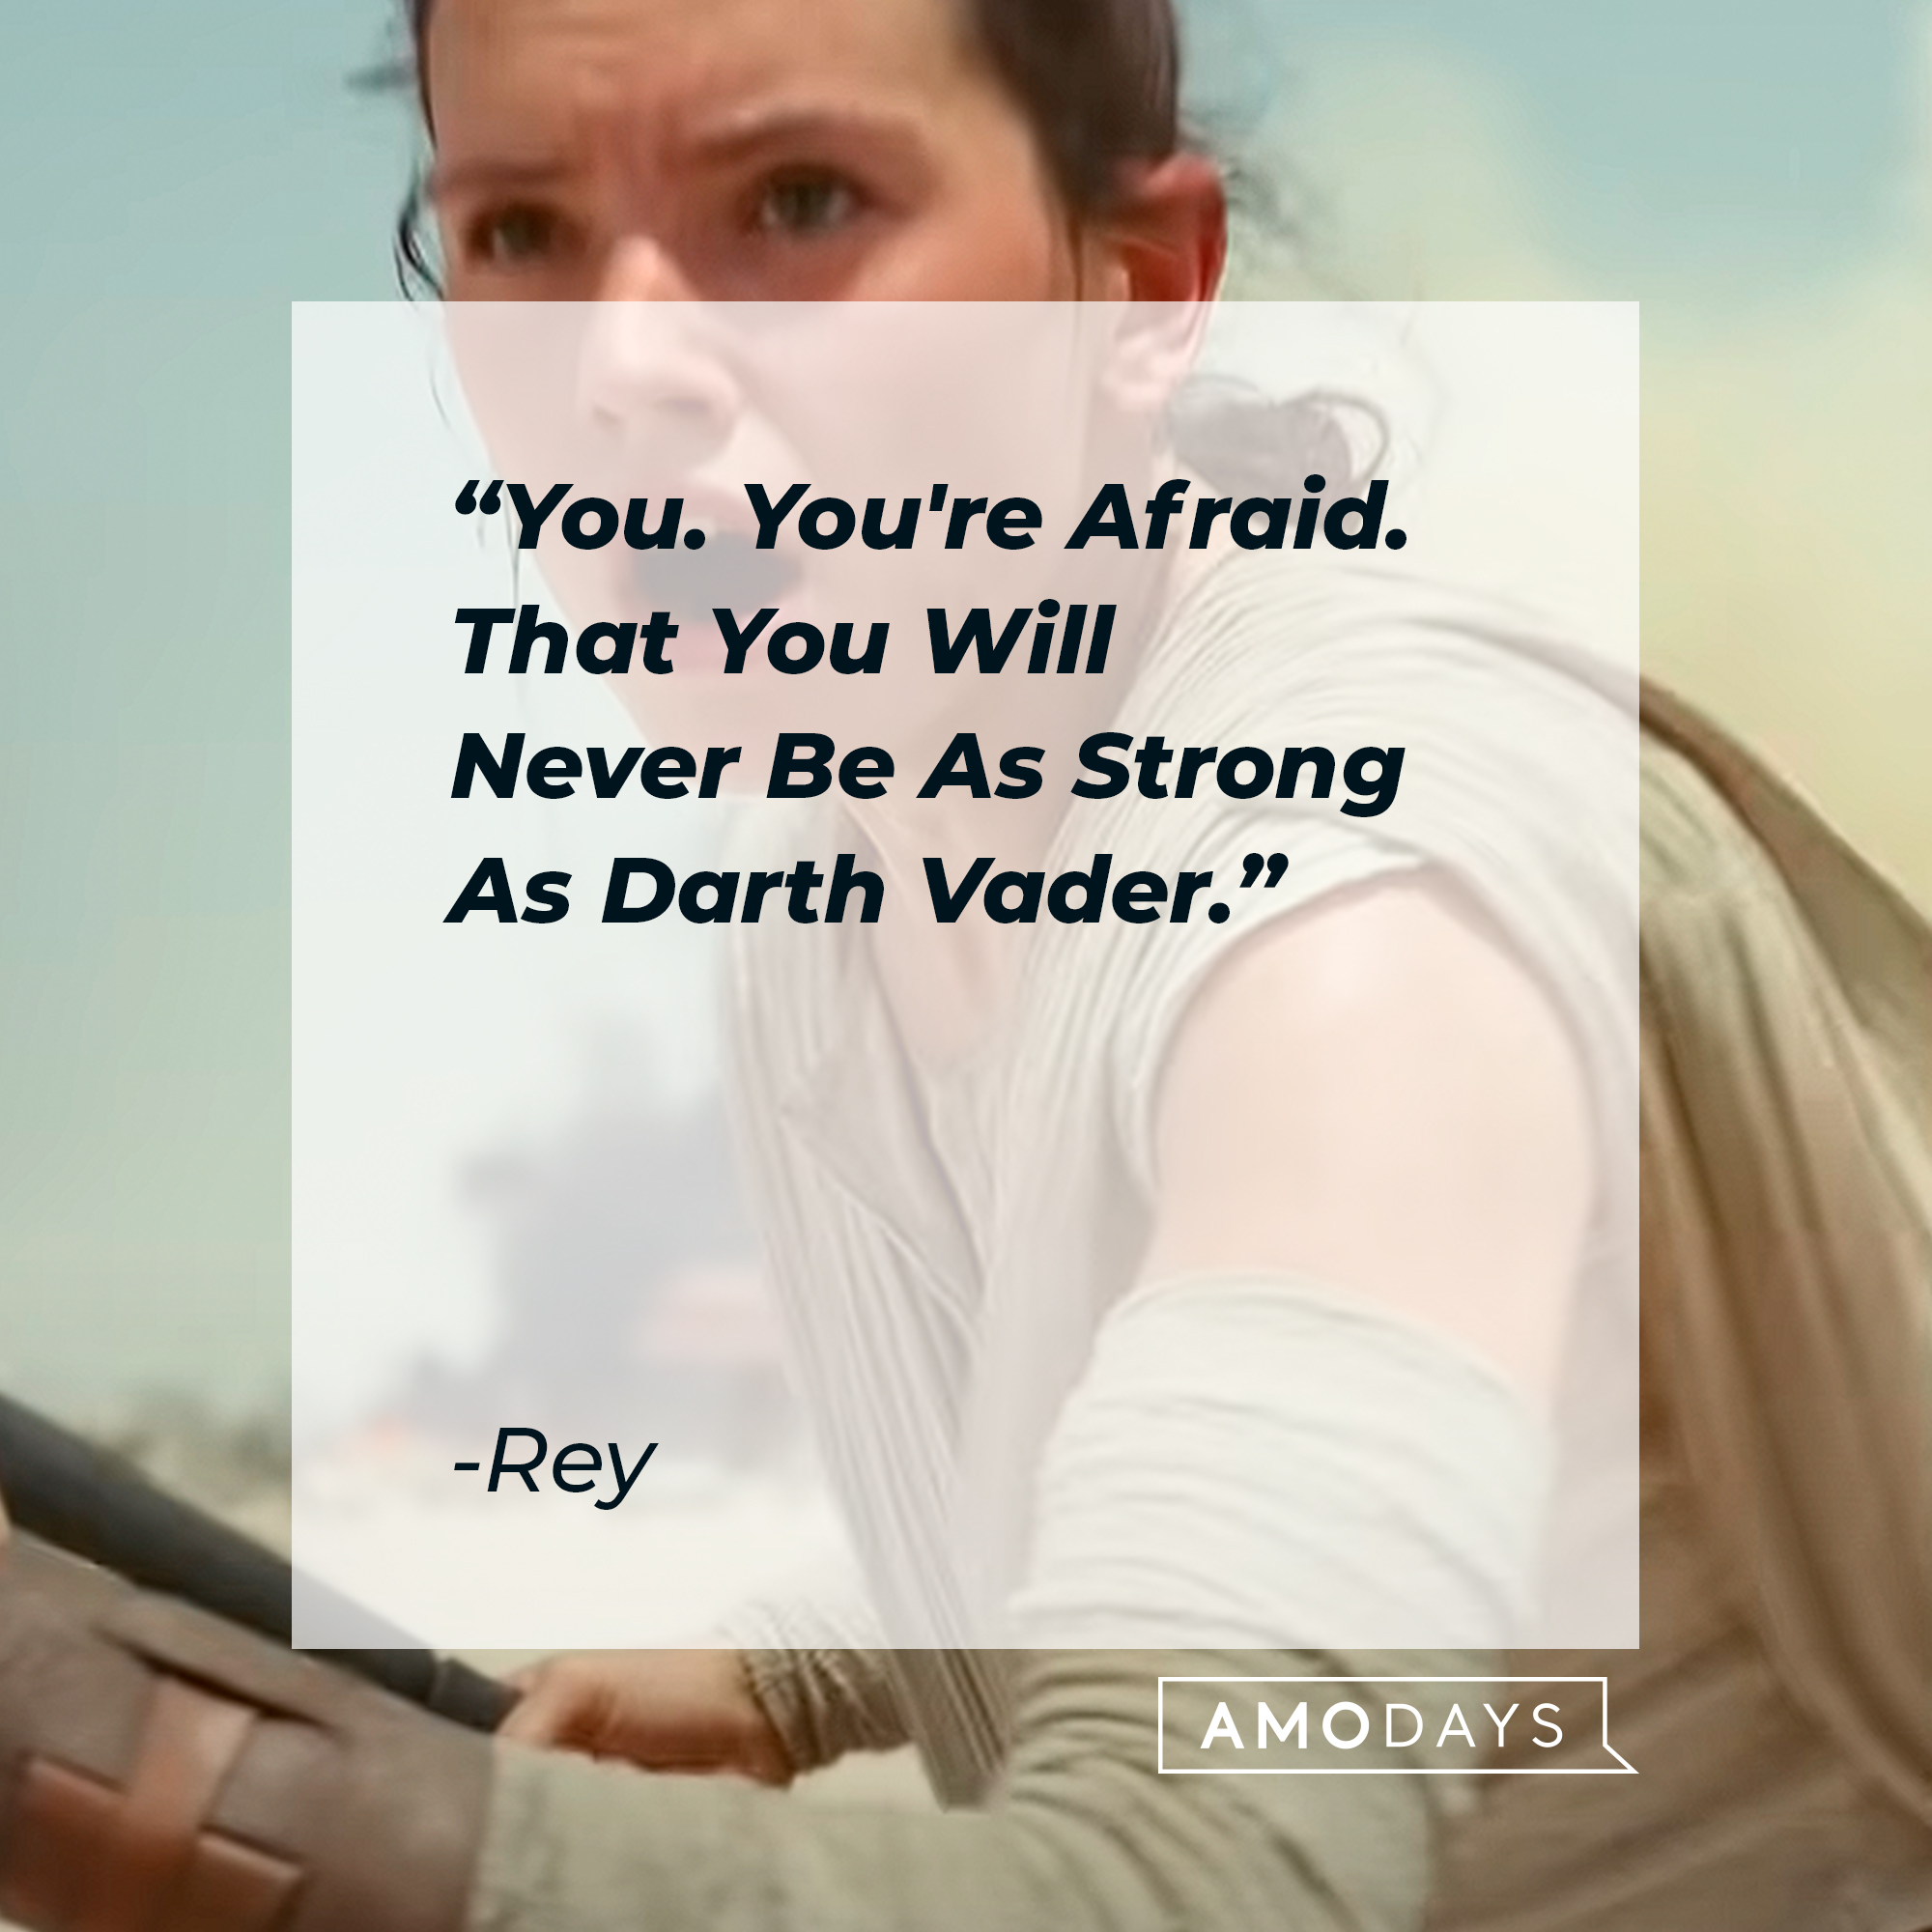 Rey's quote: "You. You're Afraid. That You Will Never Be As Strong As Darth Vader." ┃Source: youtube.com/StarWars